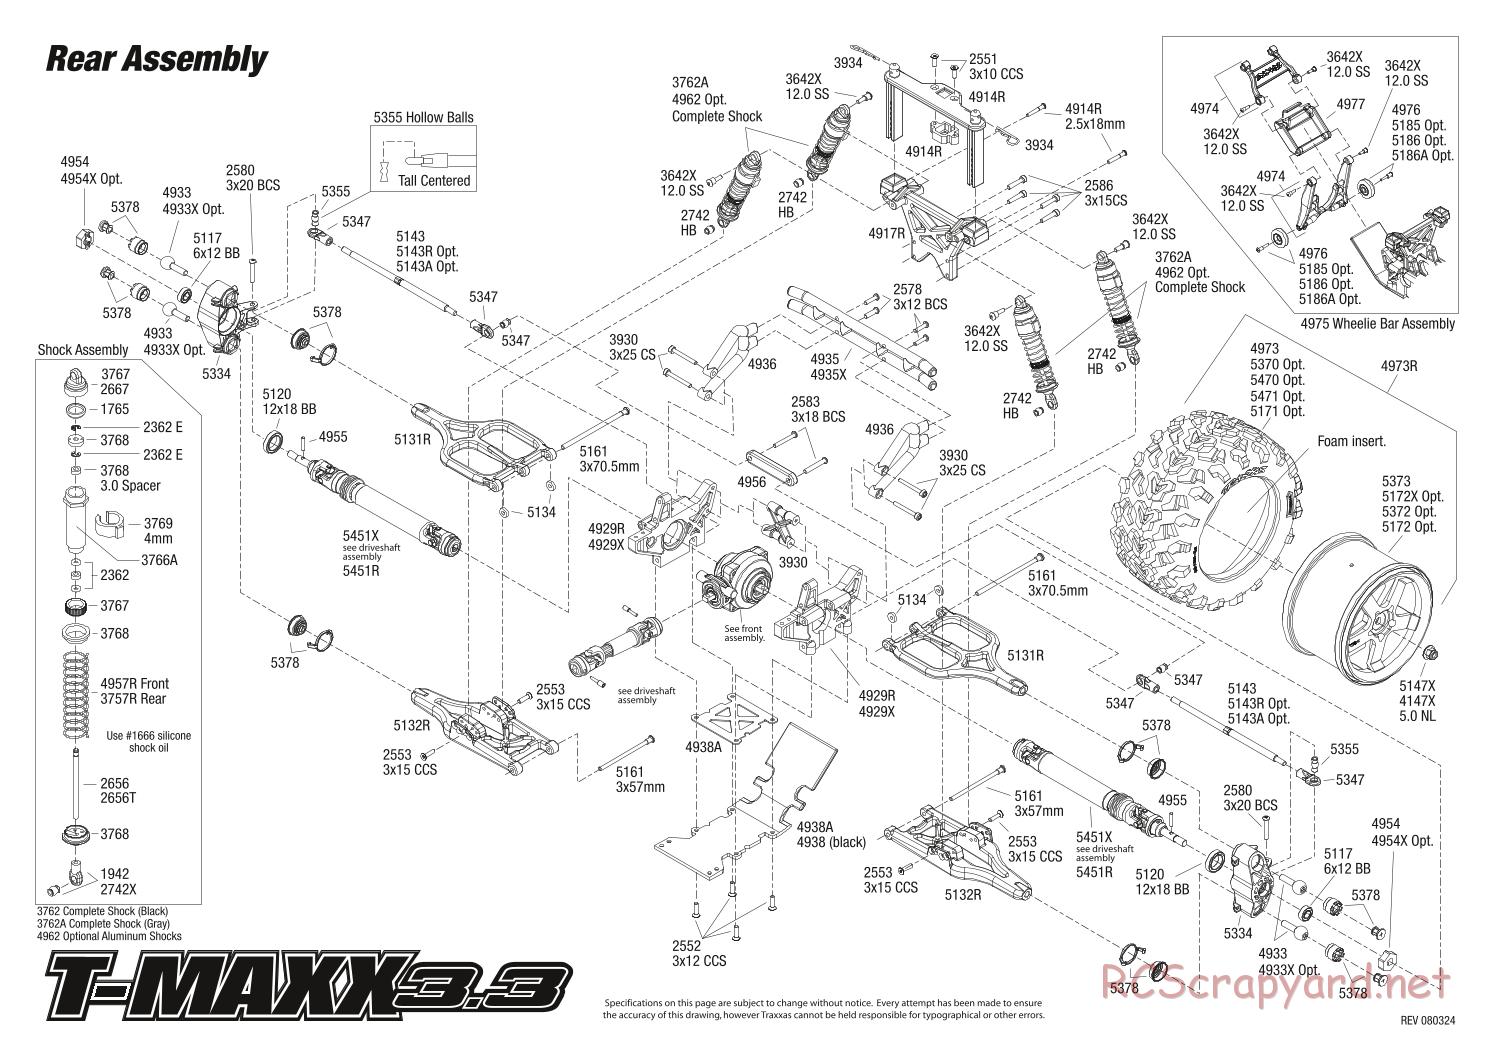 Traxxas - T-Maxx 3.3 (2008) - Exploded Views - Page 3